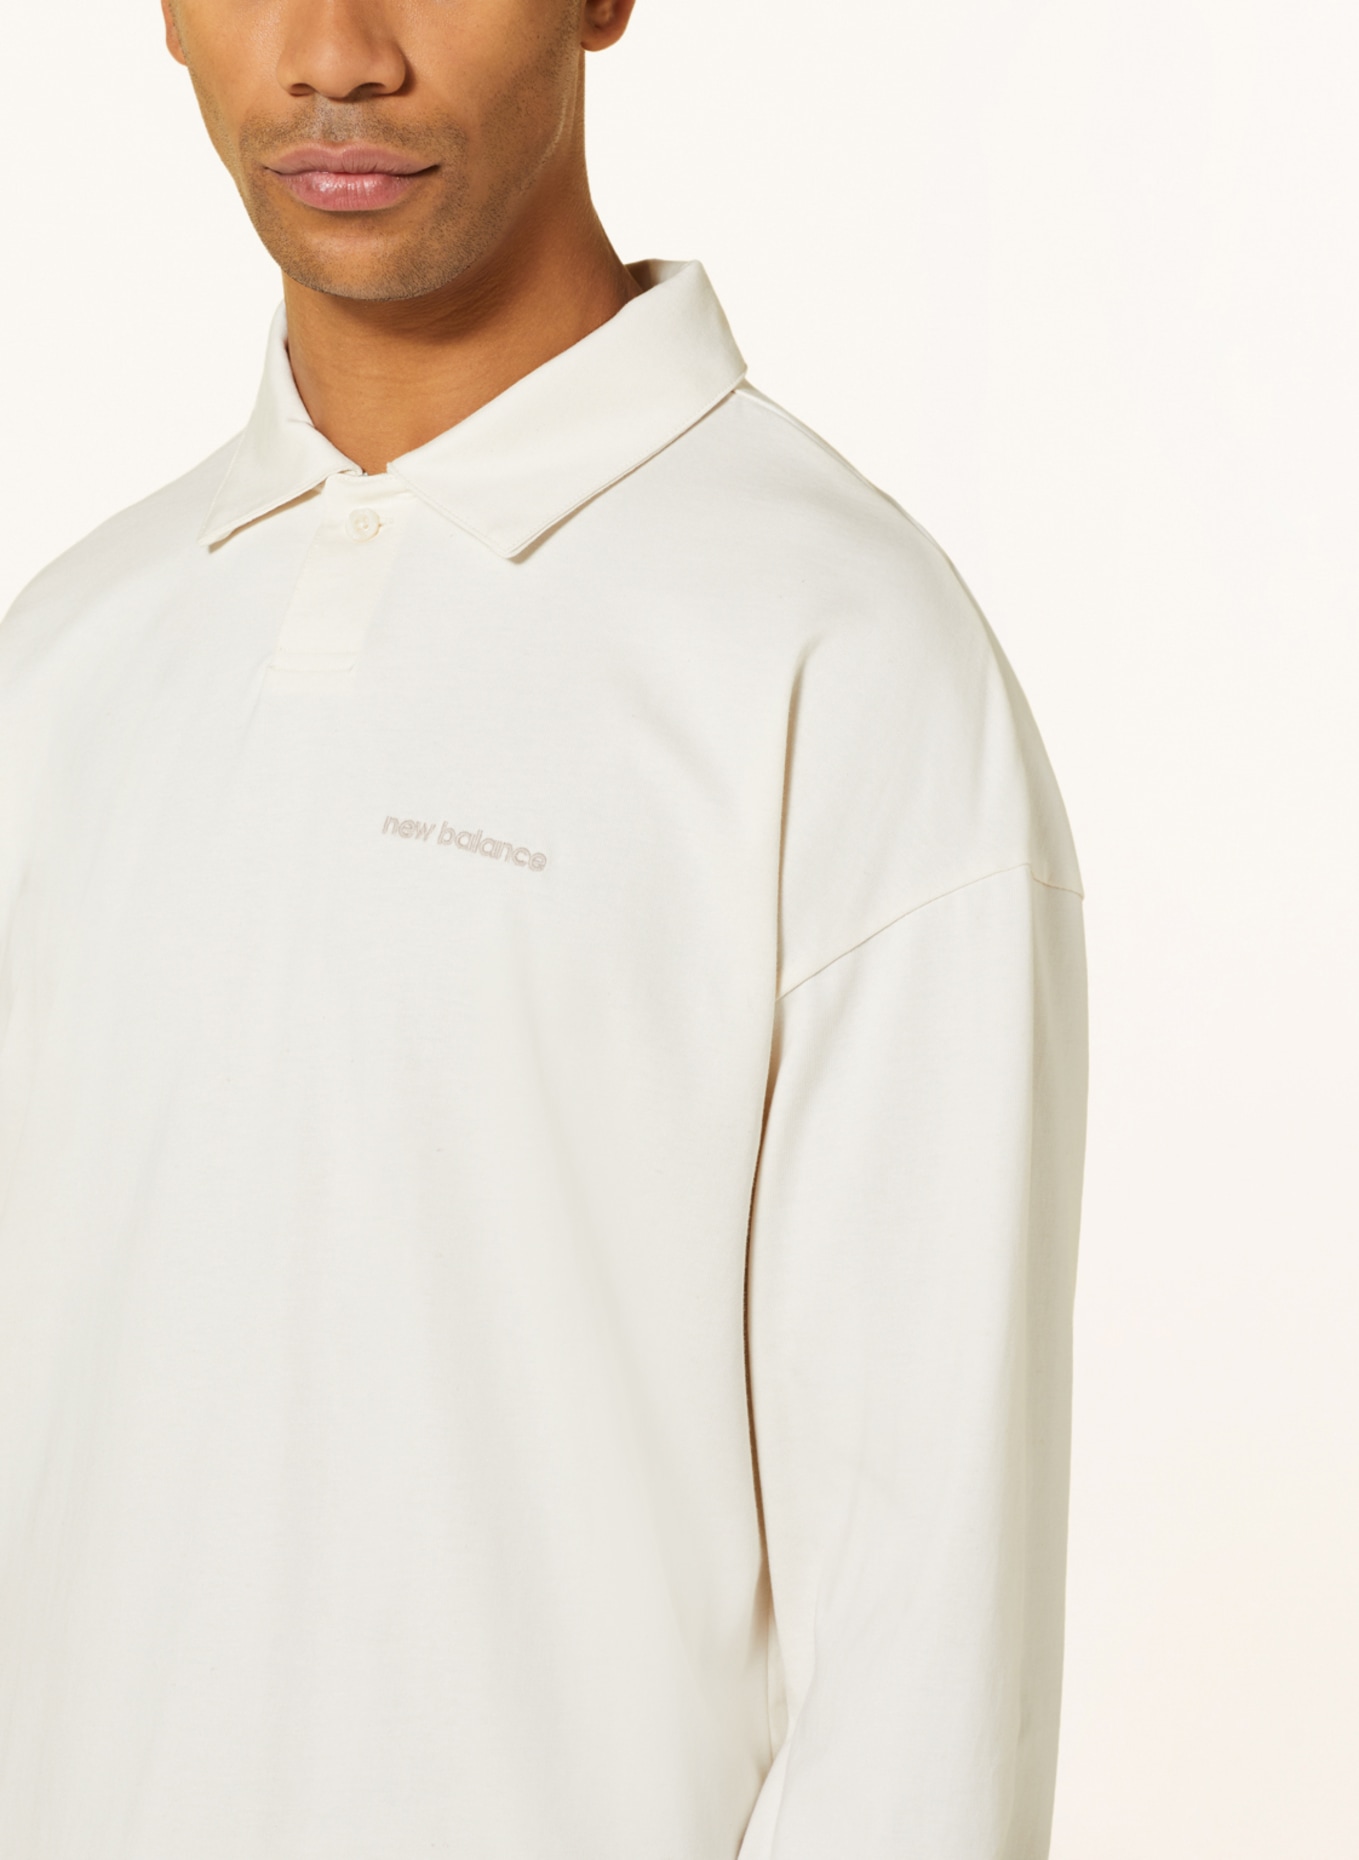 new balance Jersey-Poloshirt ATHLETICS LINEAR Relaxed Fit, Farbe: CREME (Bild 4)